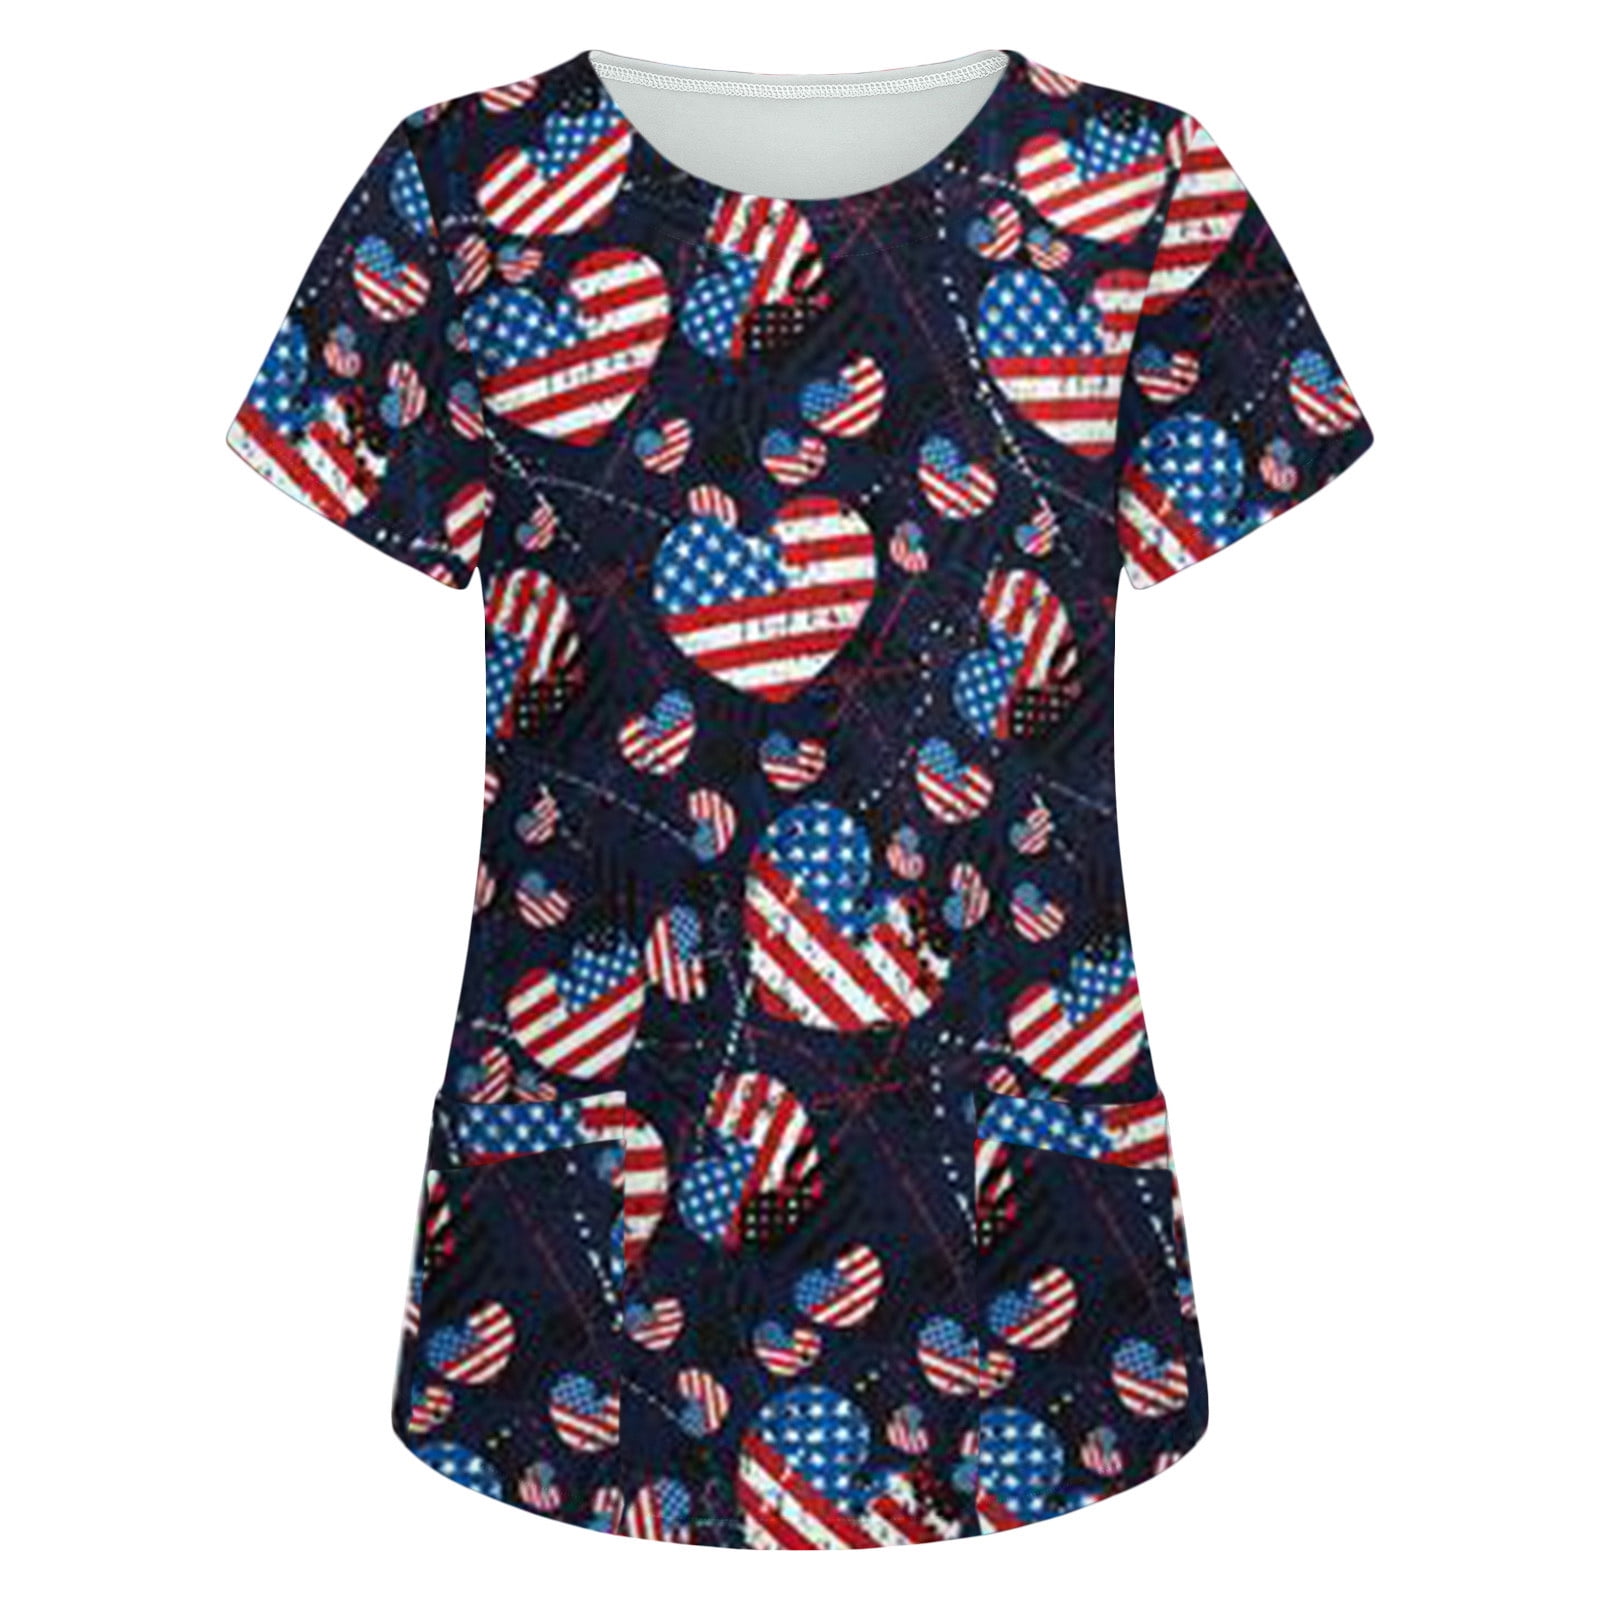 qucoqpe 4th of July Scrub Top Patriotic Independence Day Women's Summer ...